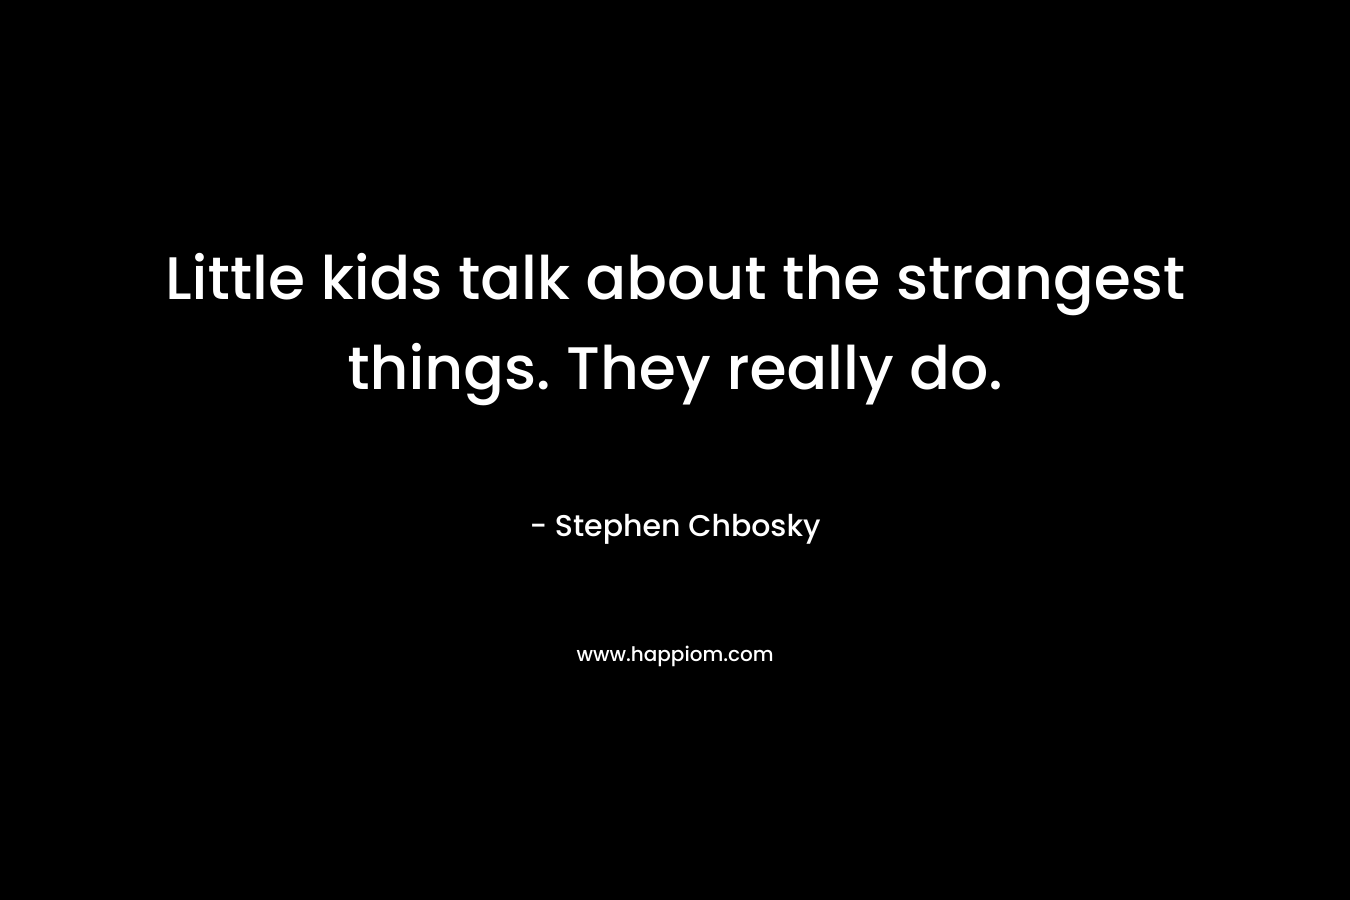 Little kids talk about the strangest things. They really do. – Stephen Chbosky